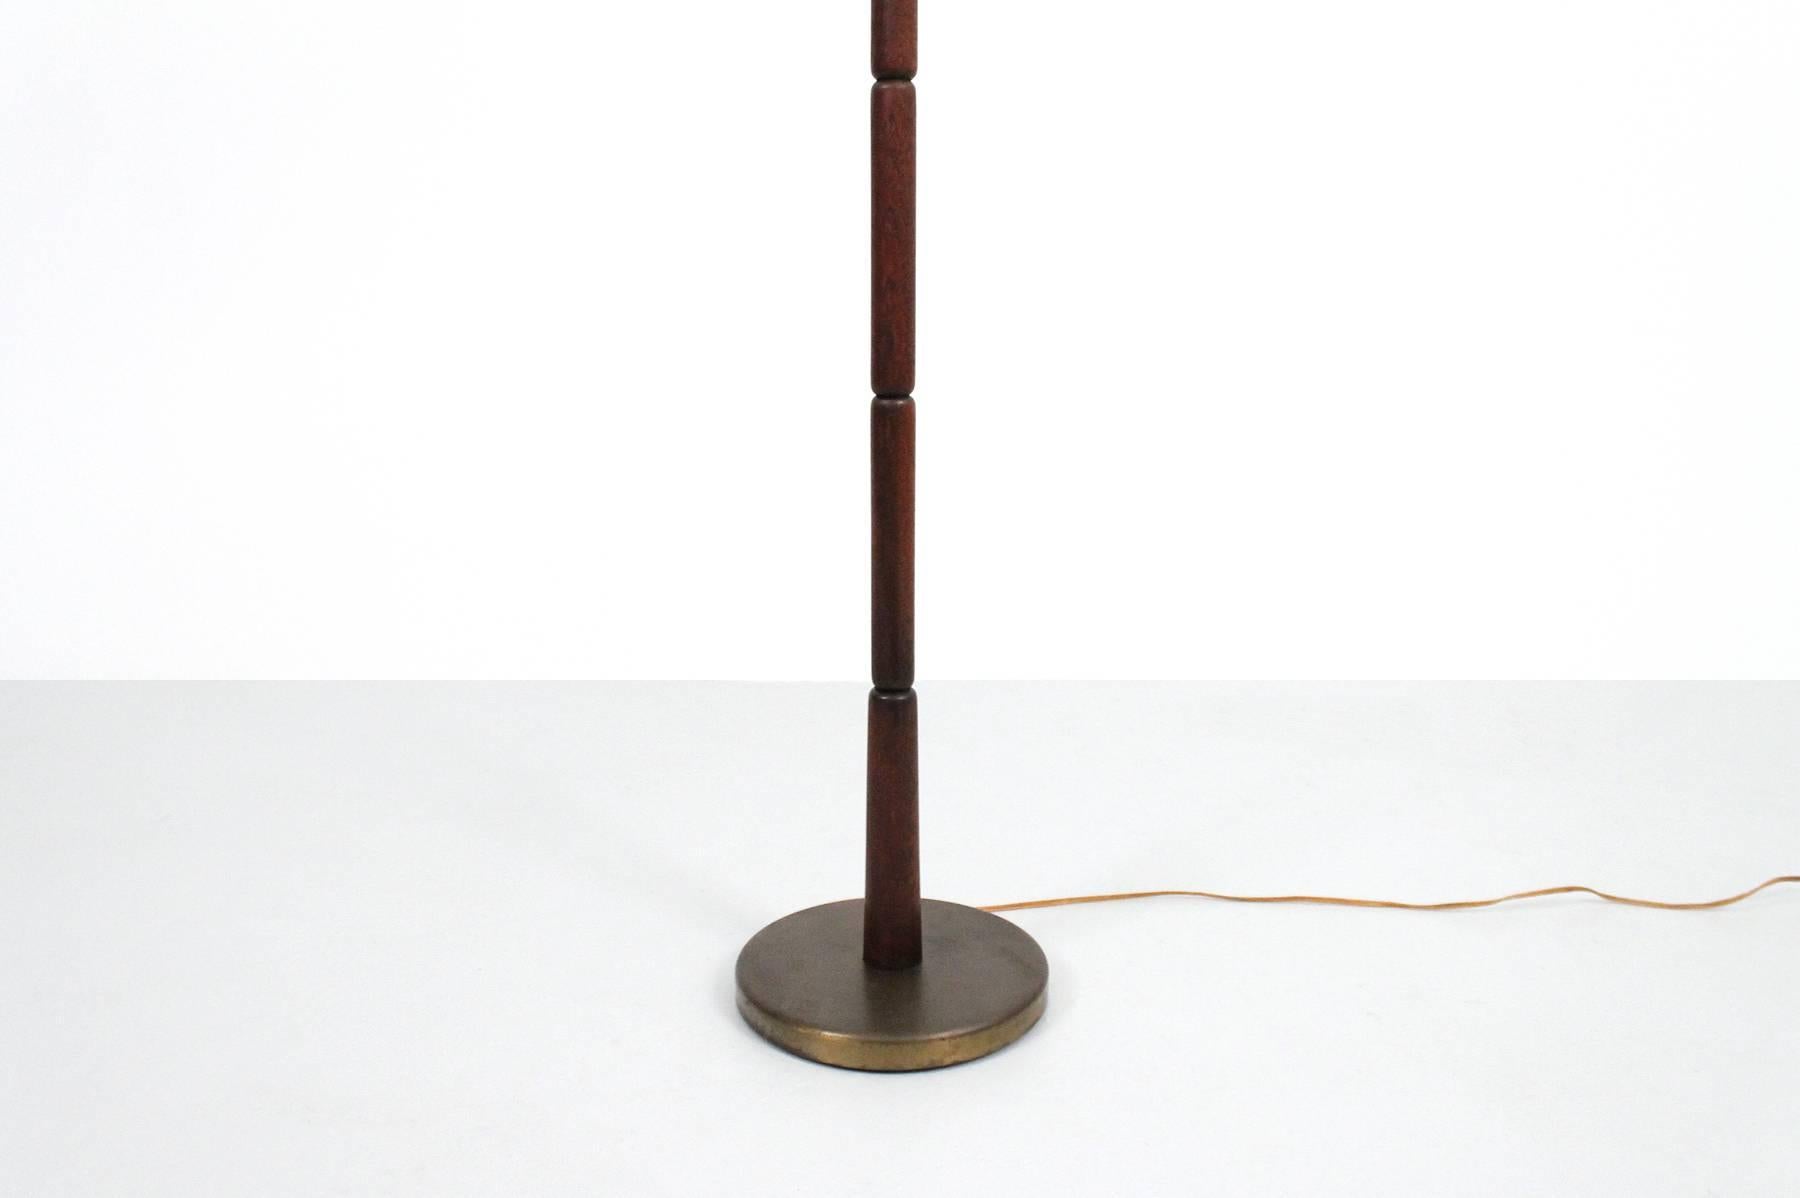 Early Stewart Ross James designed floor lamp for Hansen Lighting NYC.  Elegant details with segmented wooden shaft and period bakelite switch.  Signed in handwritten script to underneath of the base. This lamp is being sold without an original